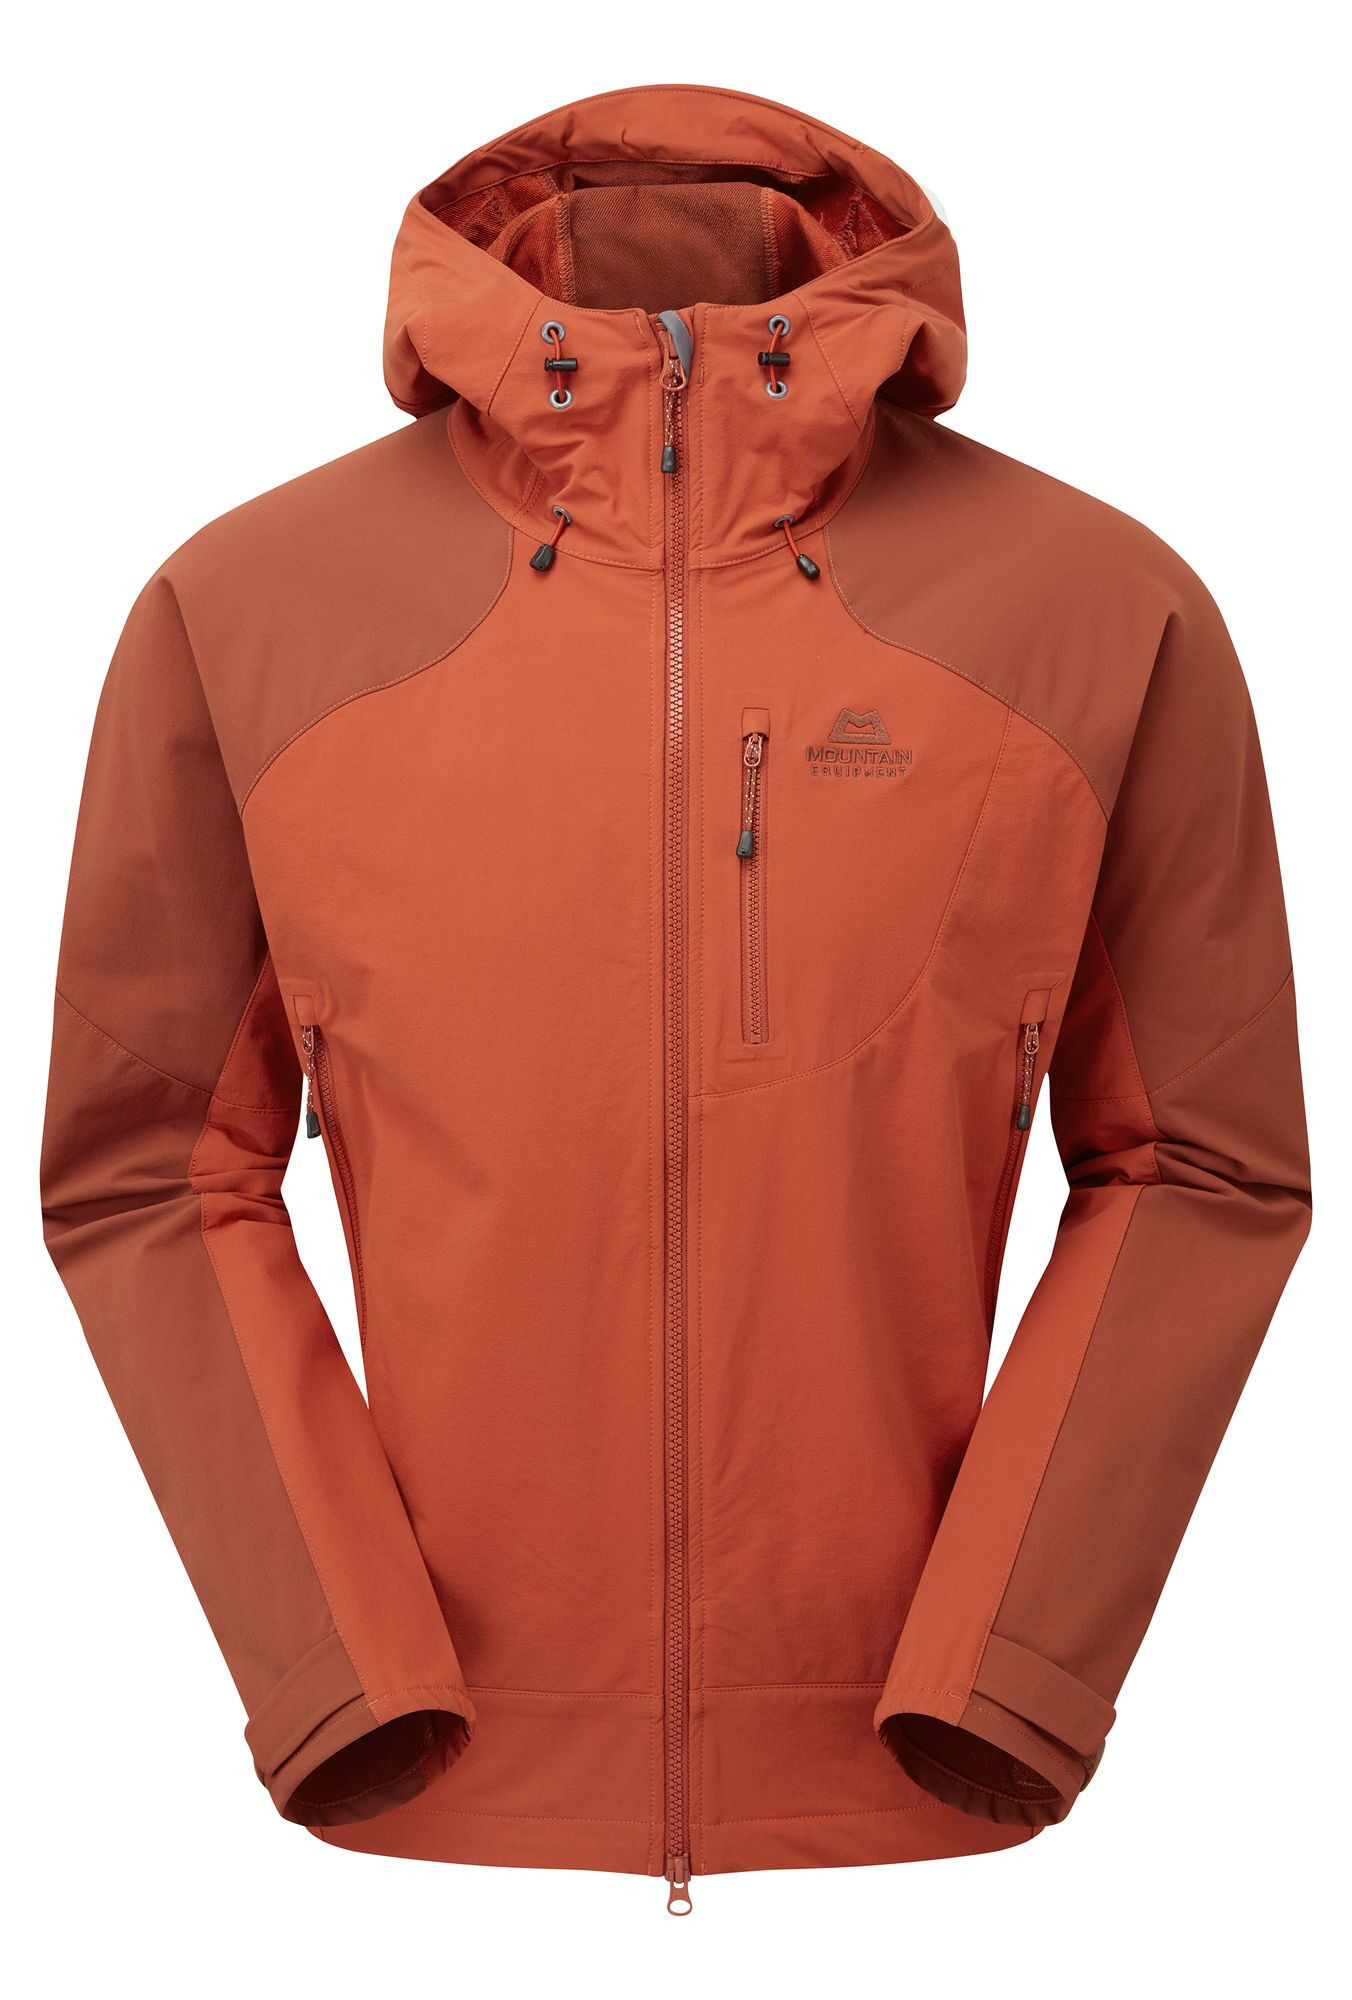 Mountain Equipment Frontier Hooded Jacket - Giacca softshell - Uomo | Hardloop